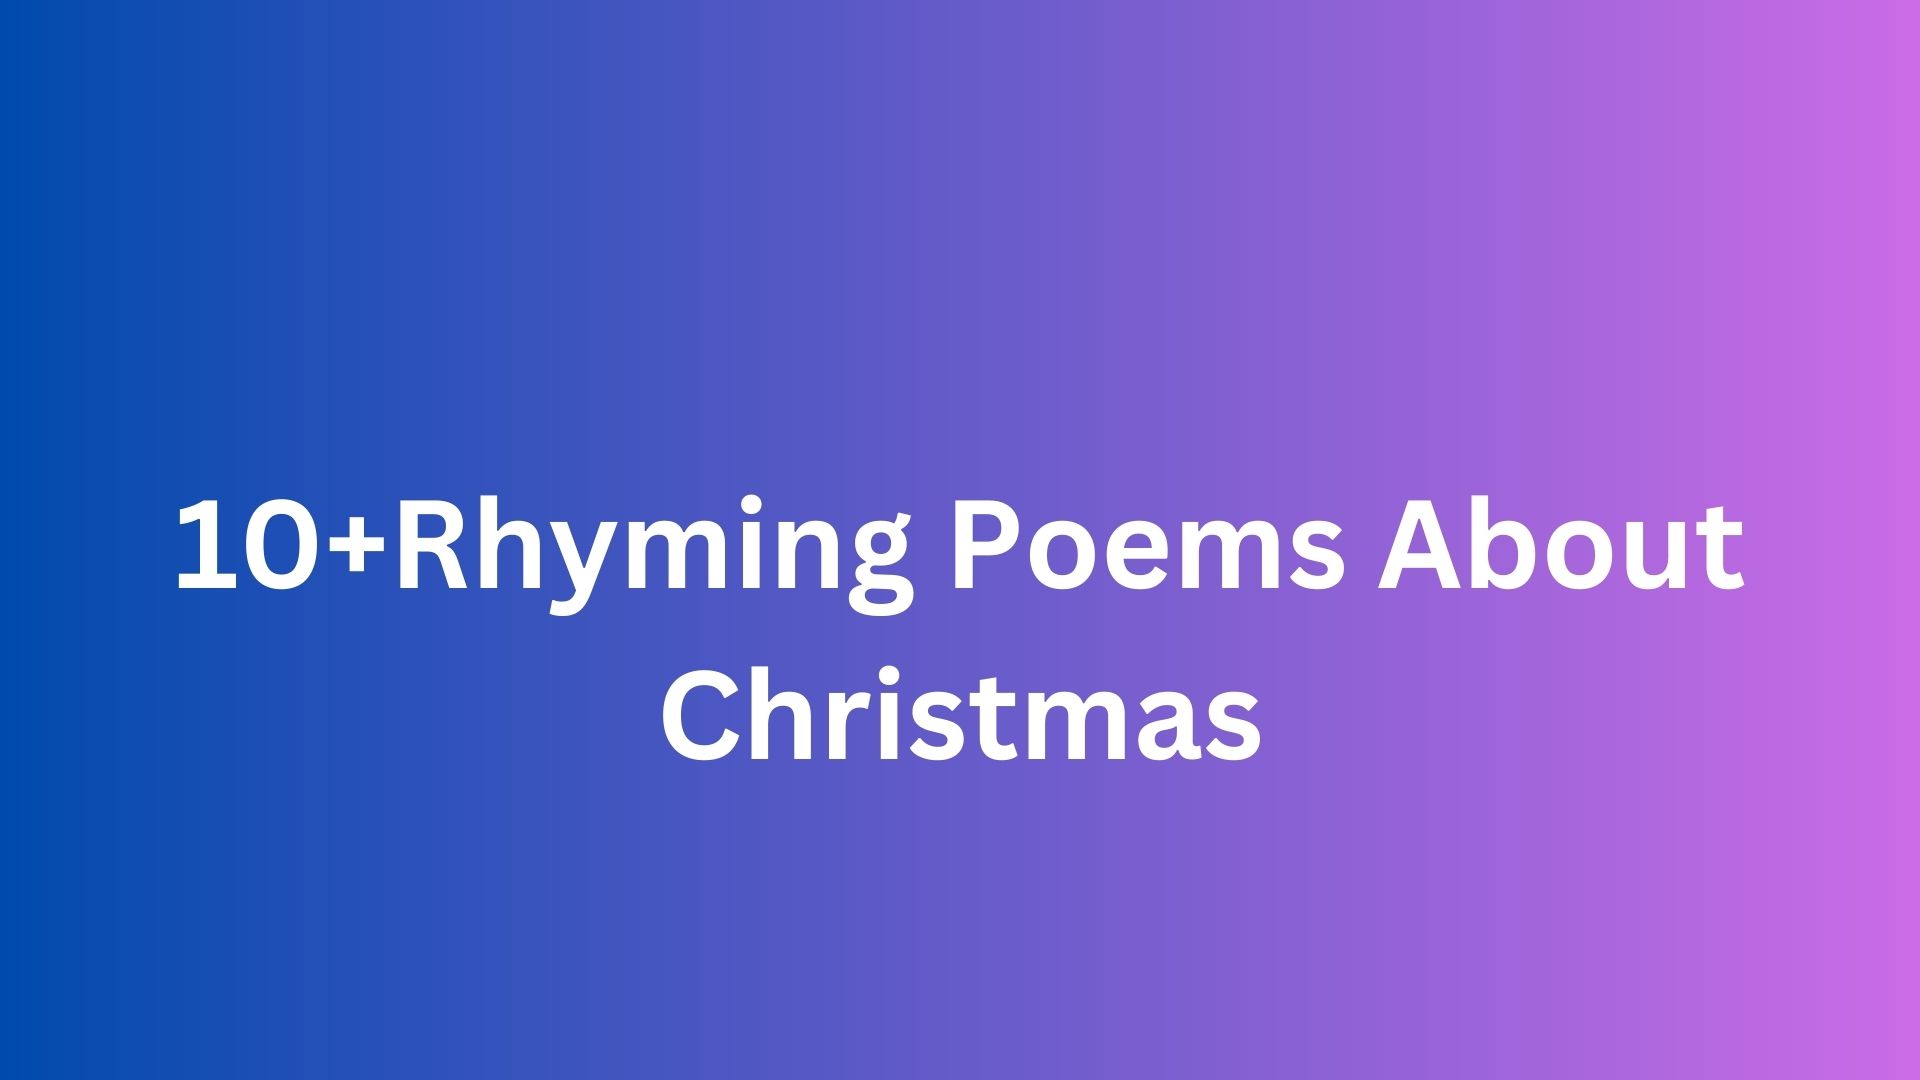 10+Rhyming Poems About Christmas - Poem Source